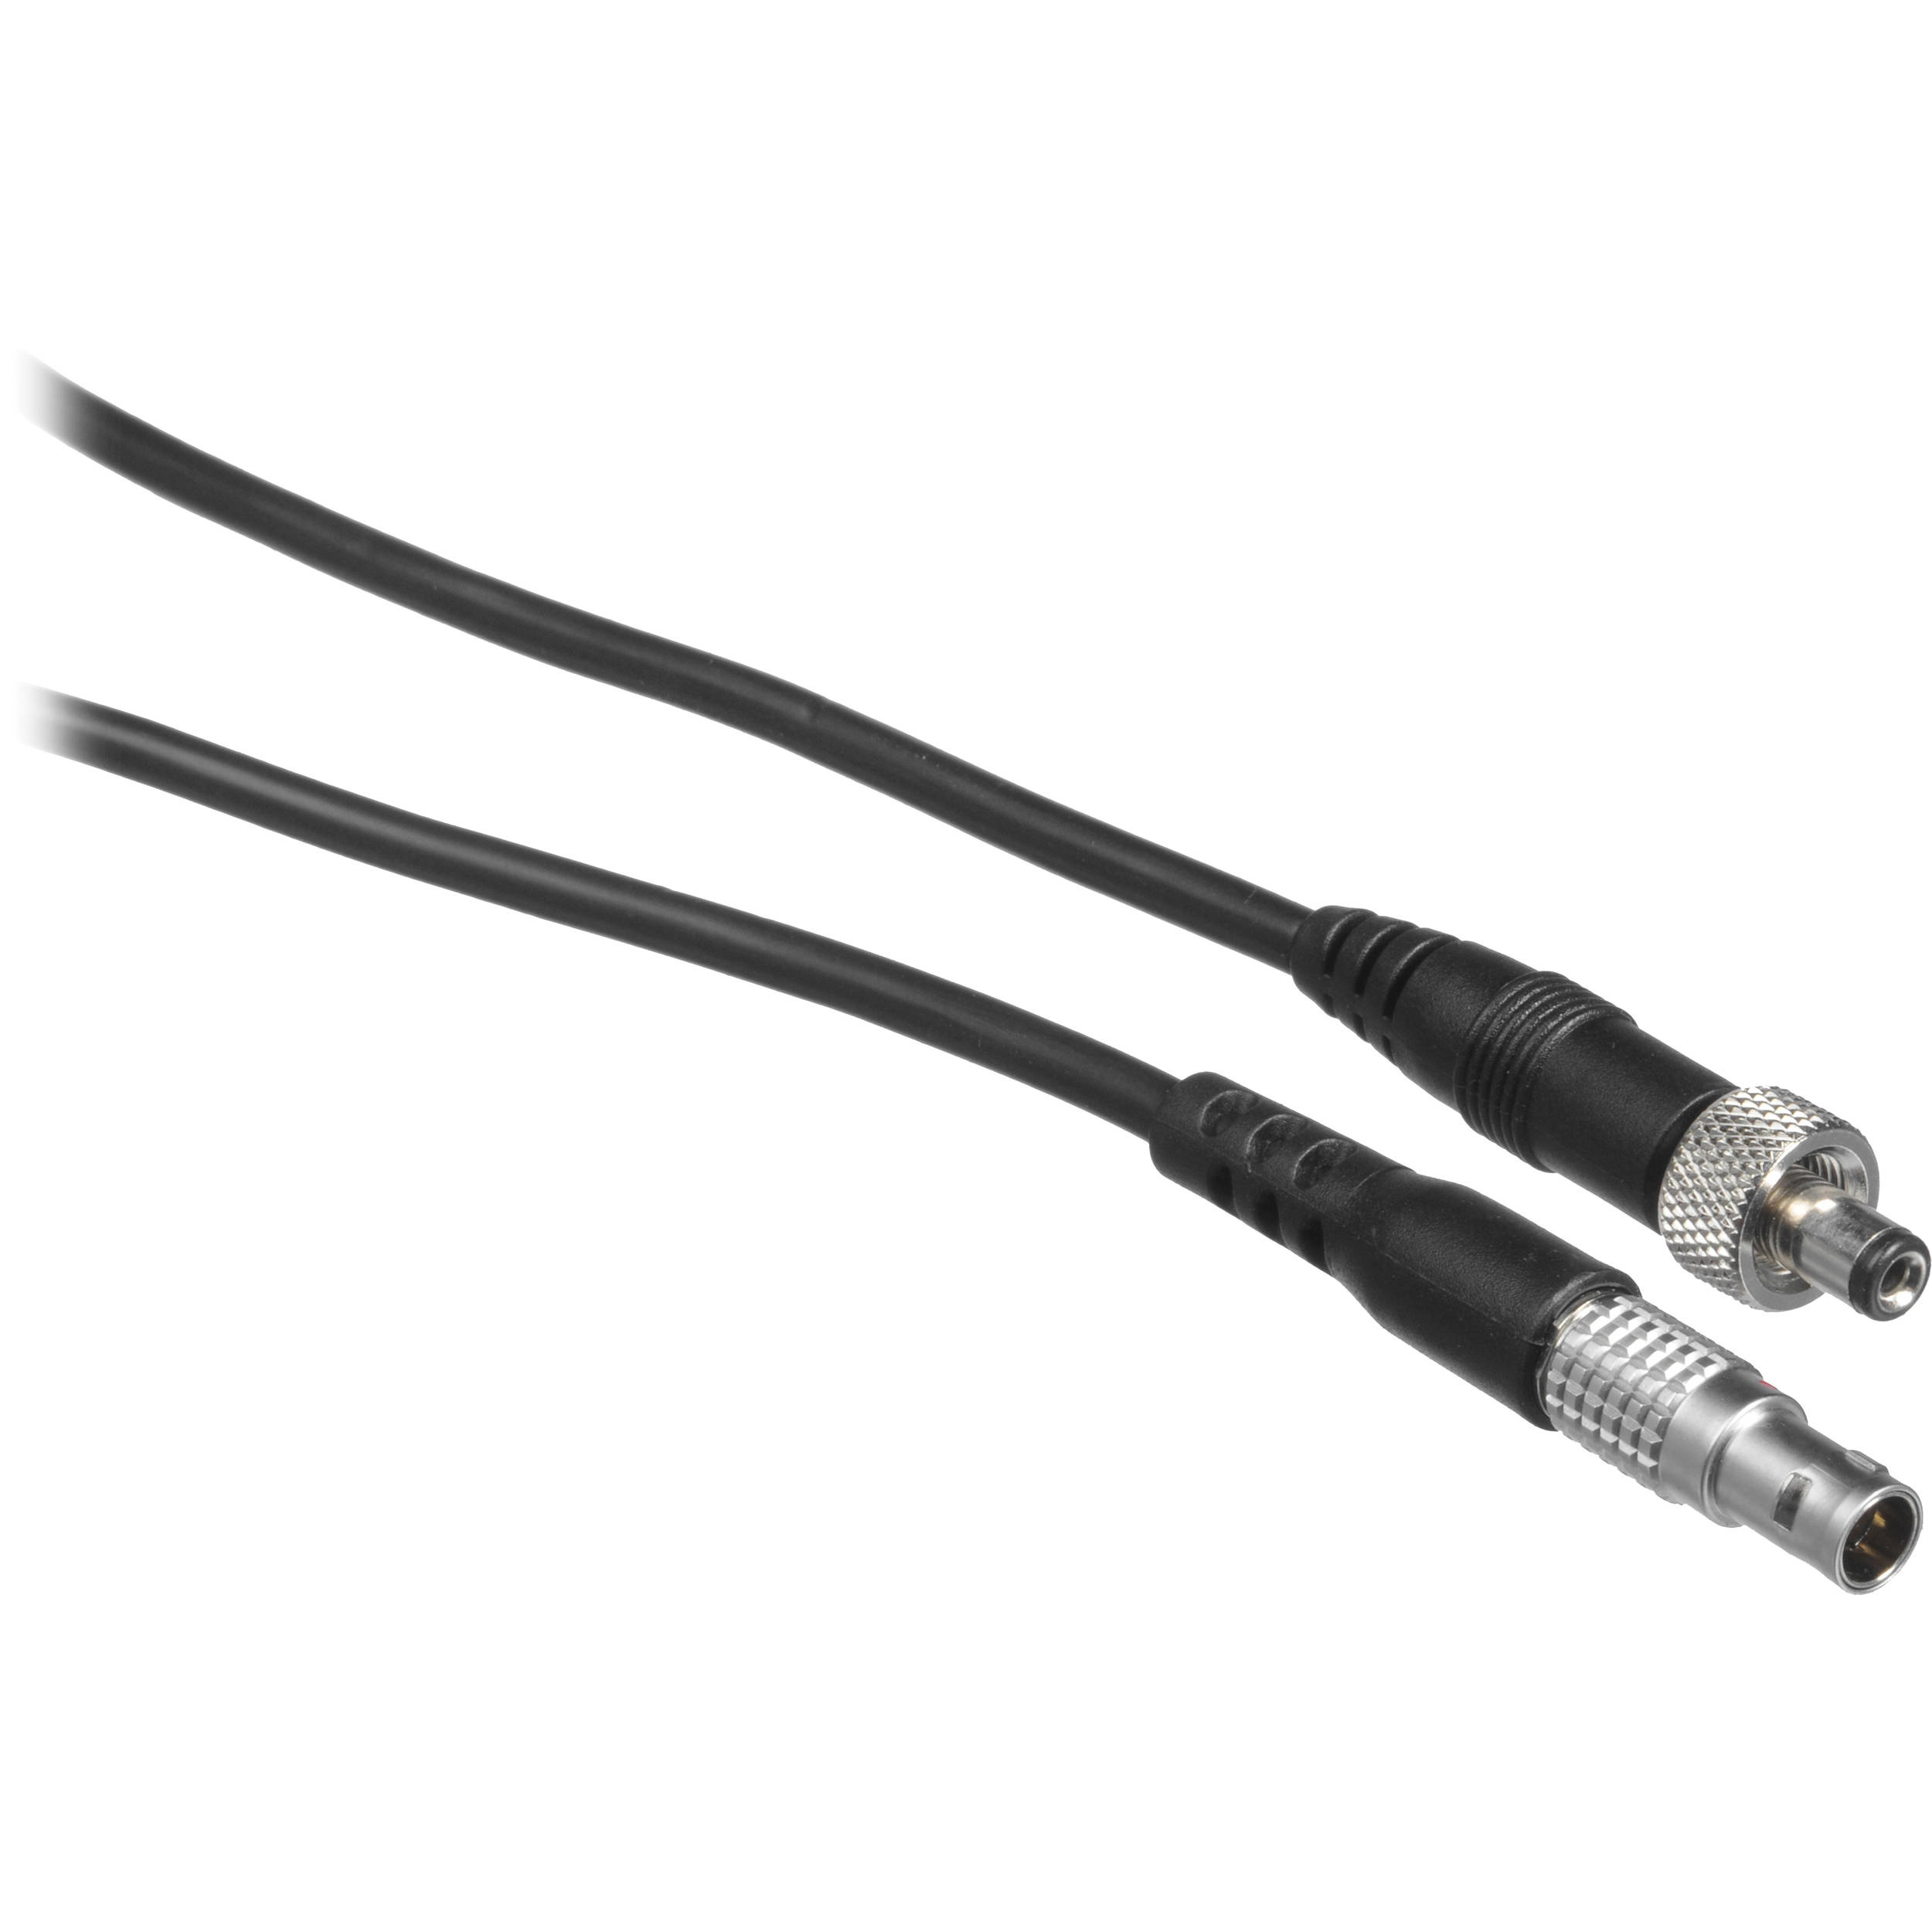 Paralinx Crossbow Power Cable